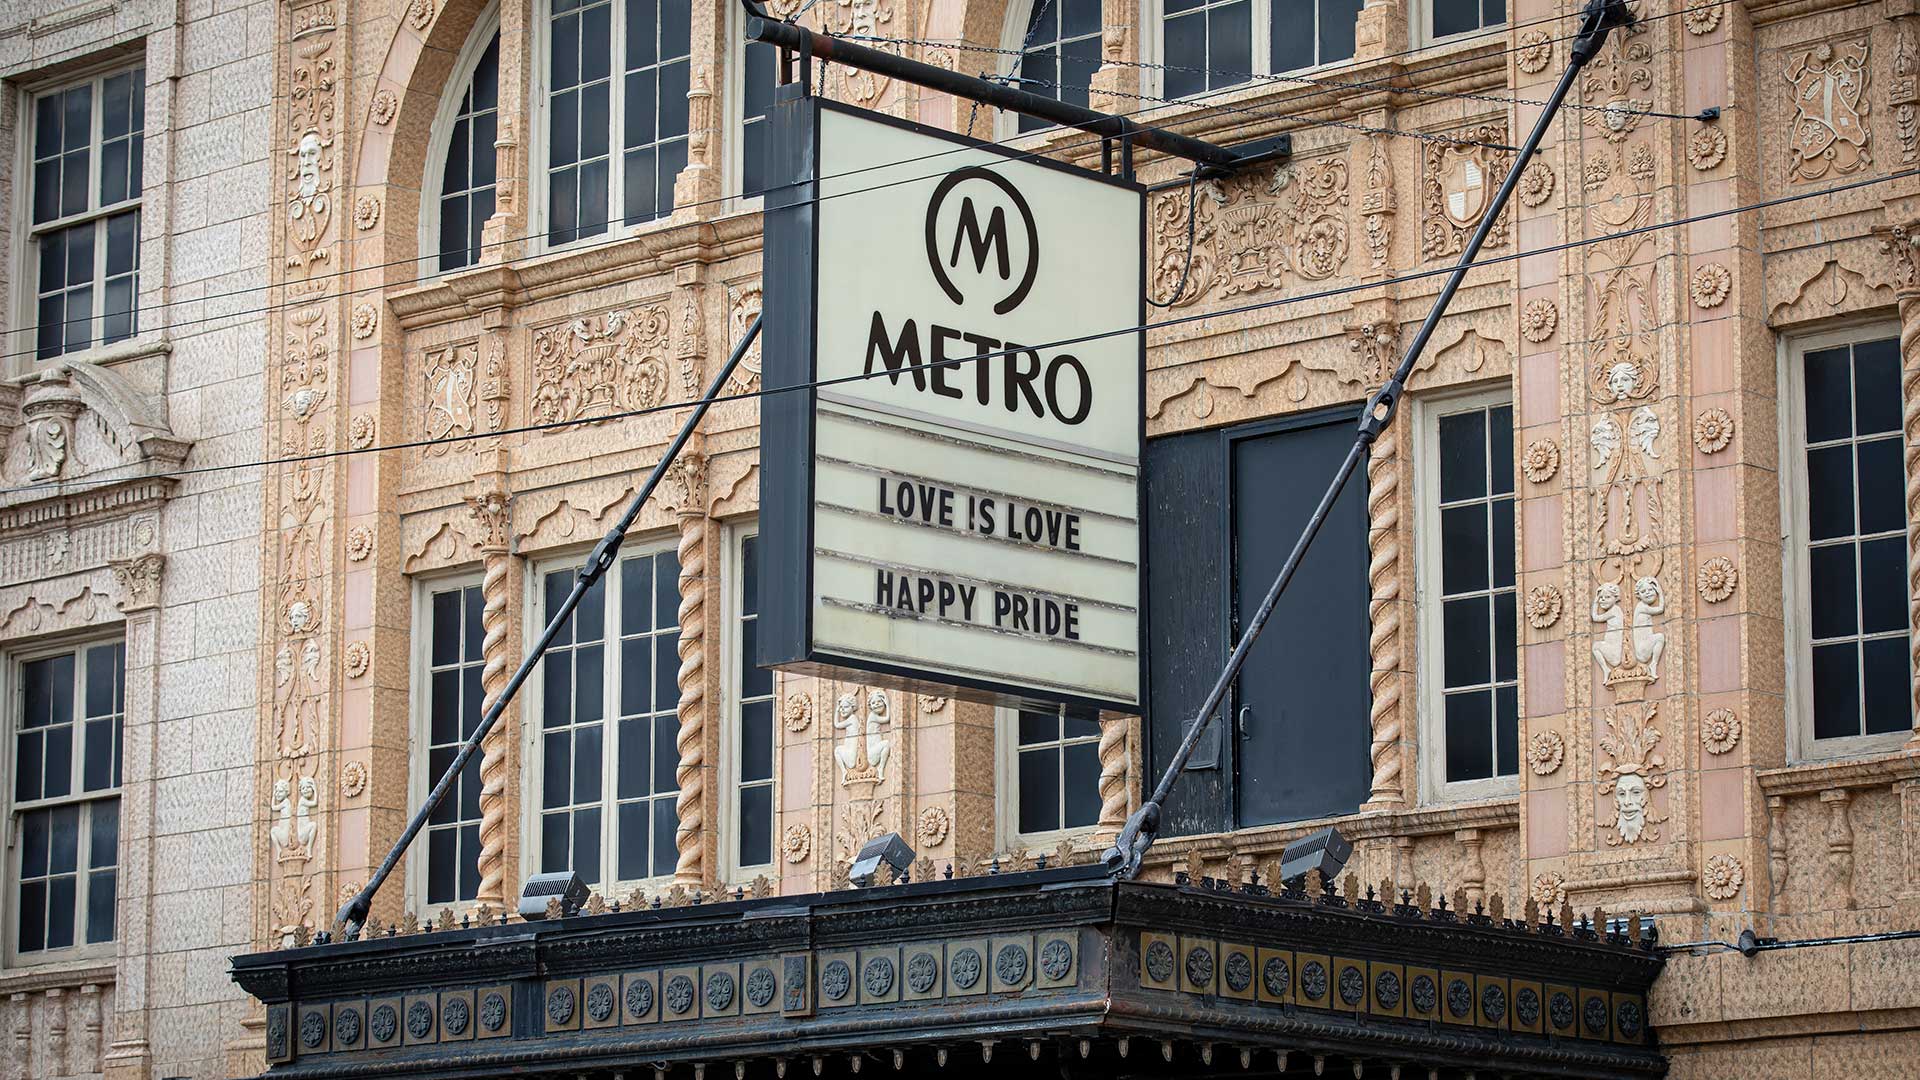 The Metro music venue sign on the front of the building.